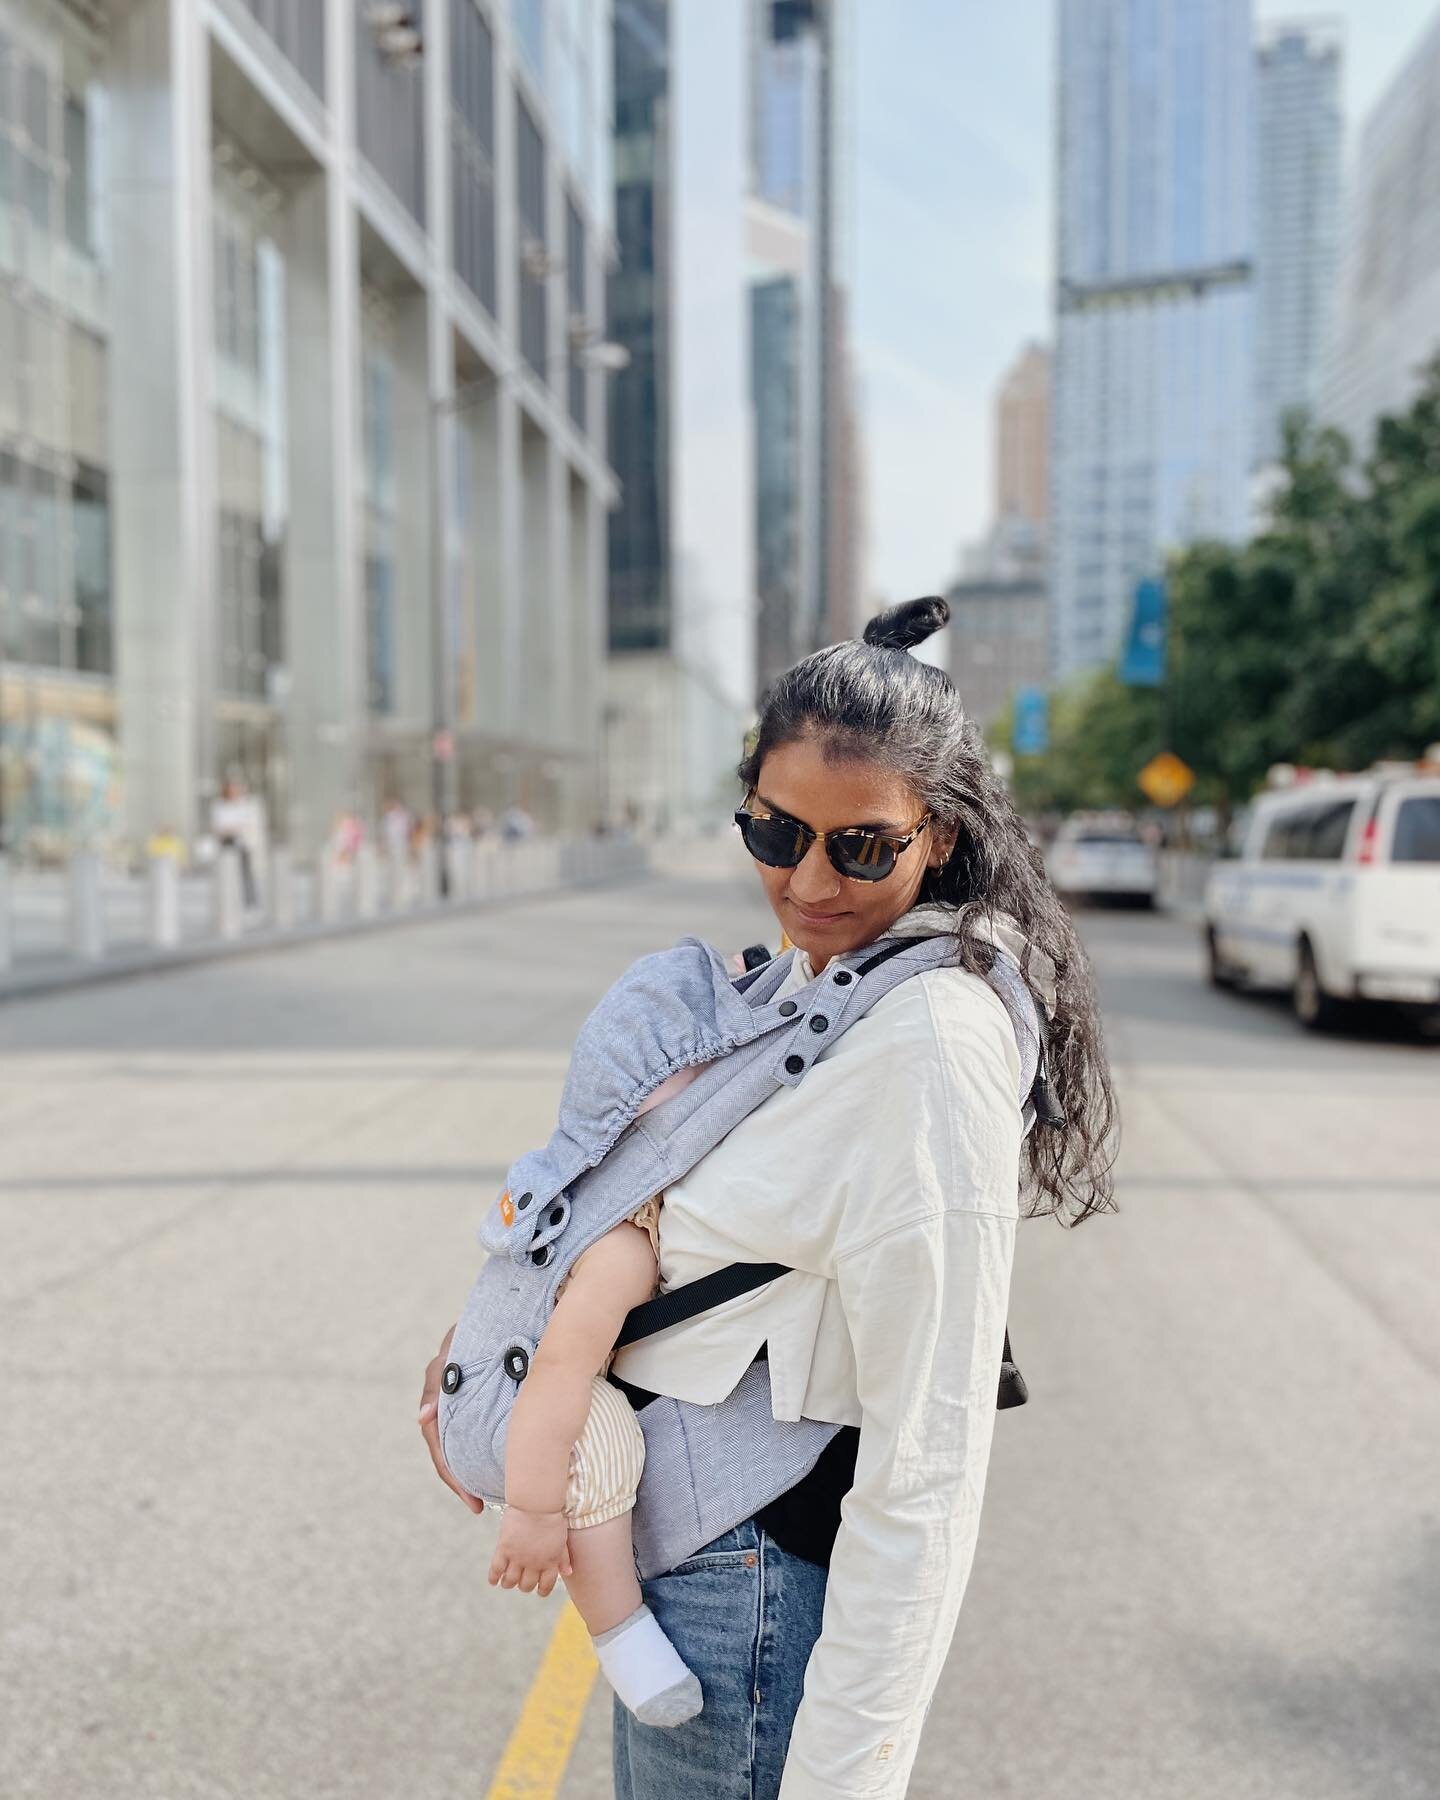 Rey Rey takes the big apple 🍎.

She&rsquo;s turned 6 months on the summer solstice. Watching a tiny human that your body grew and then gave birth to is the most magical experience. Everyday, I cherish my time with her even though the days can feel l